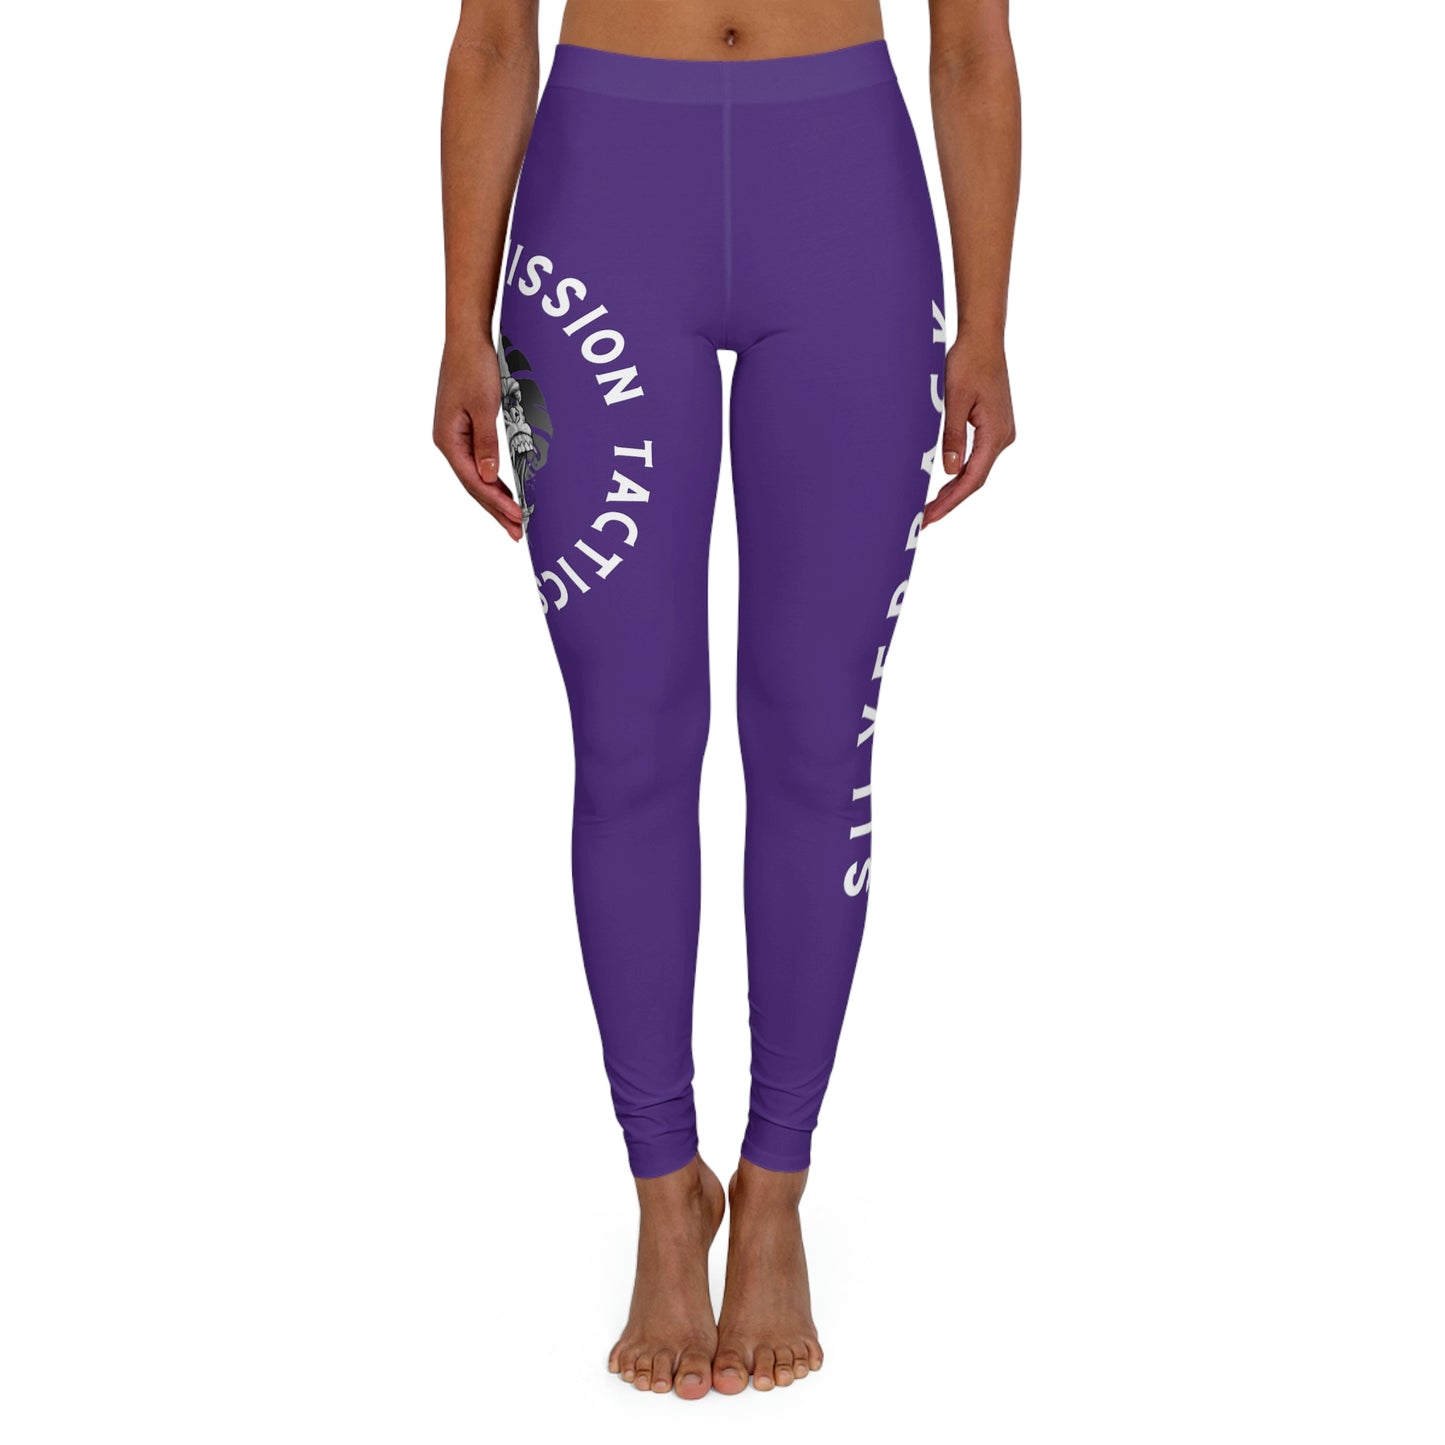 Women's Ranked Silverback Submission Tactics Spandex Leggings